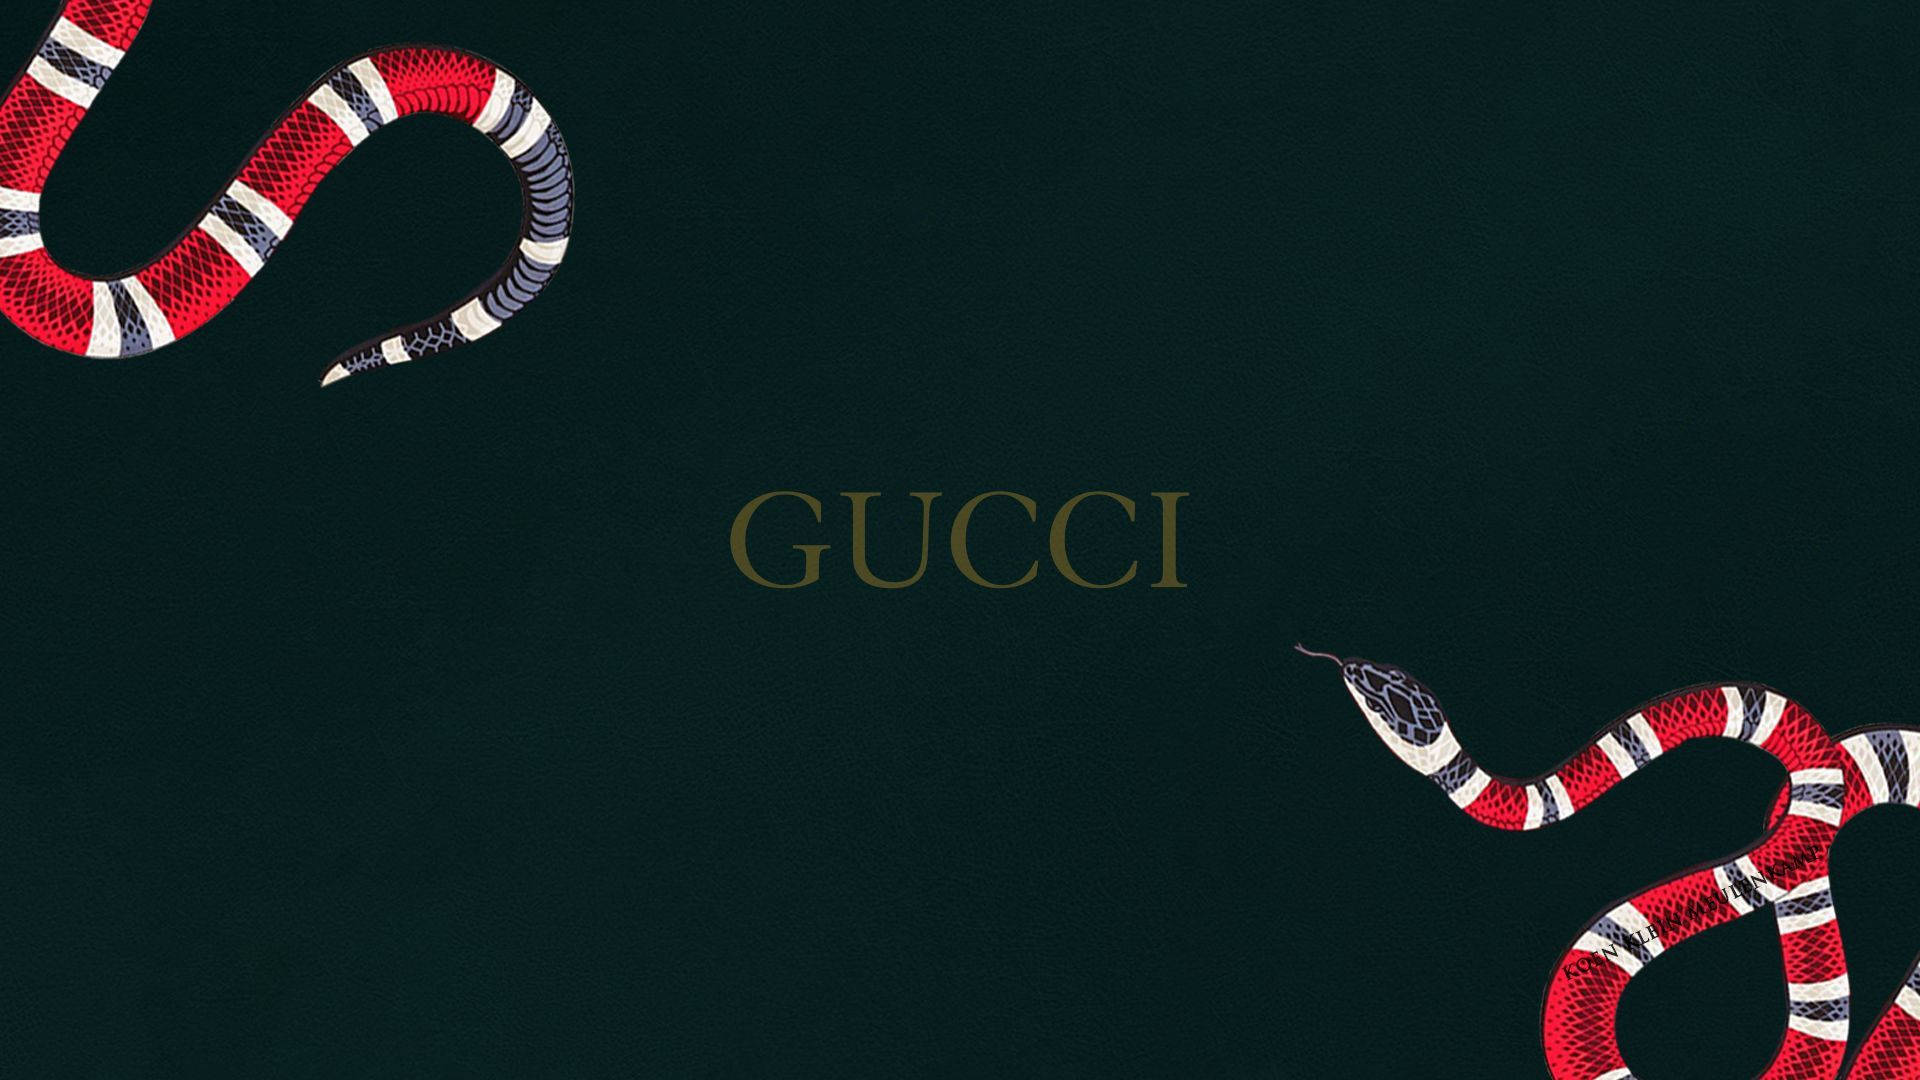 Gucci Snakes On A Black Background Background